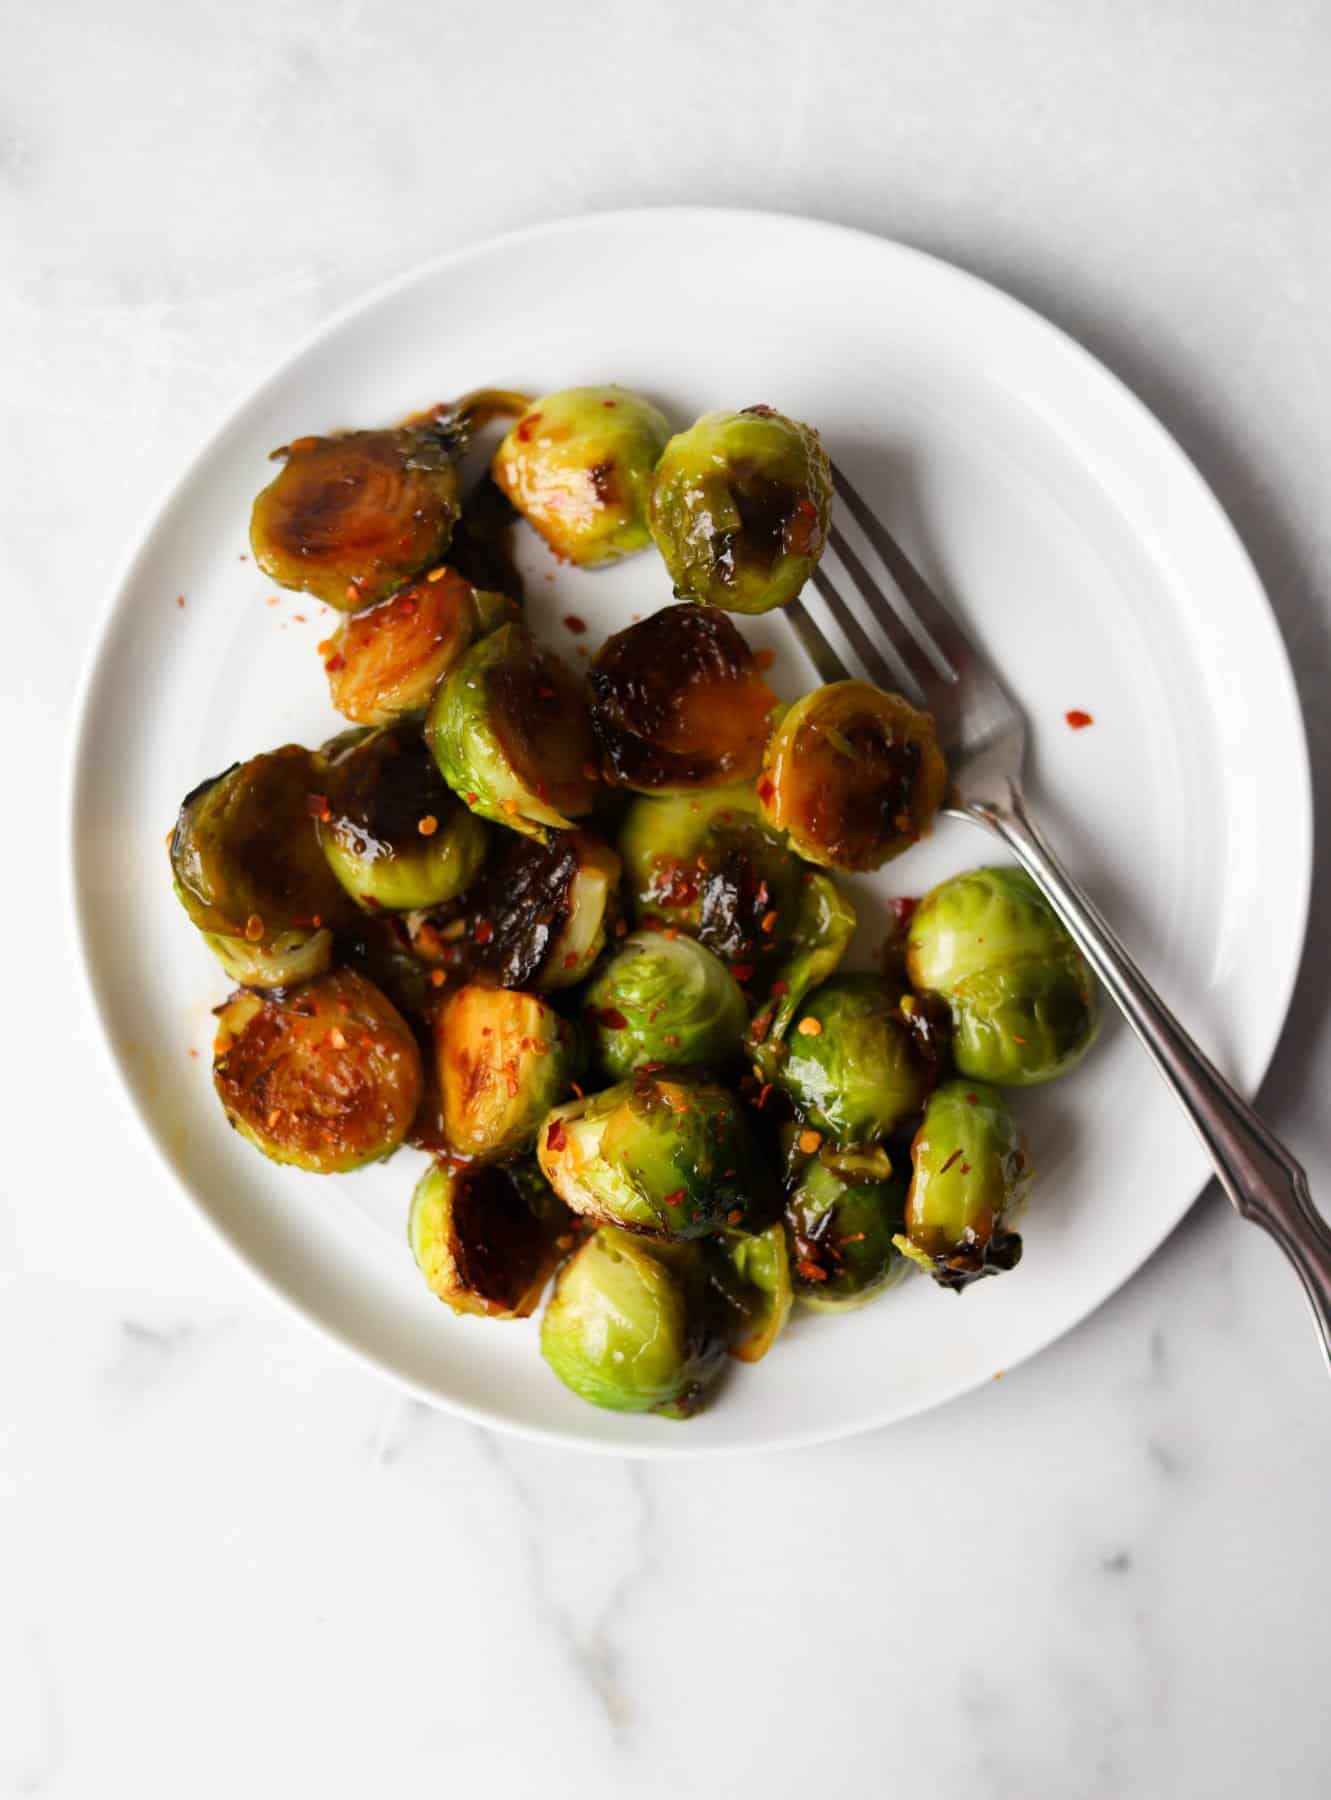 Brussels sprouts on a white plate